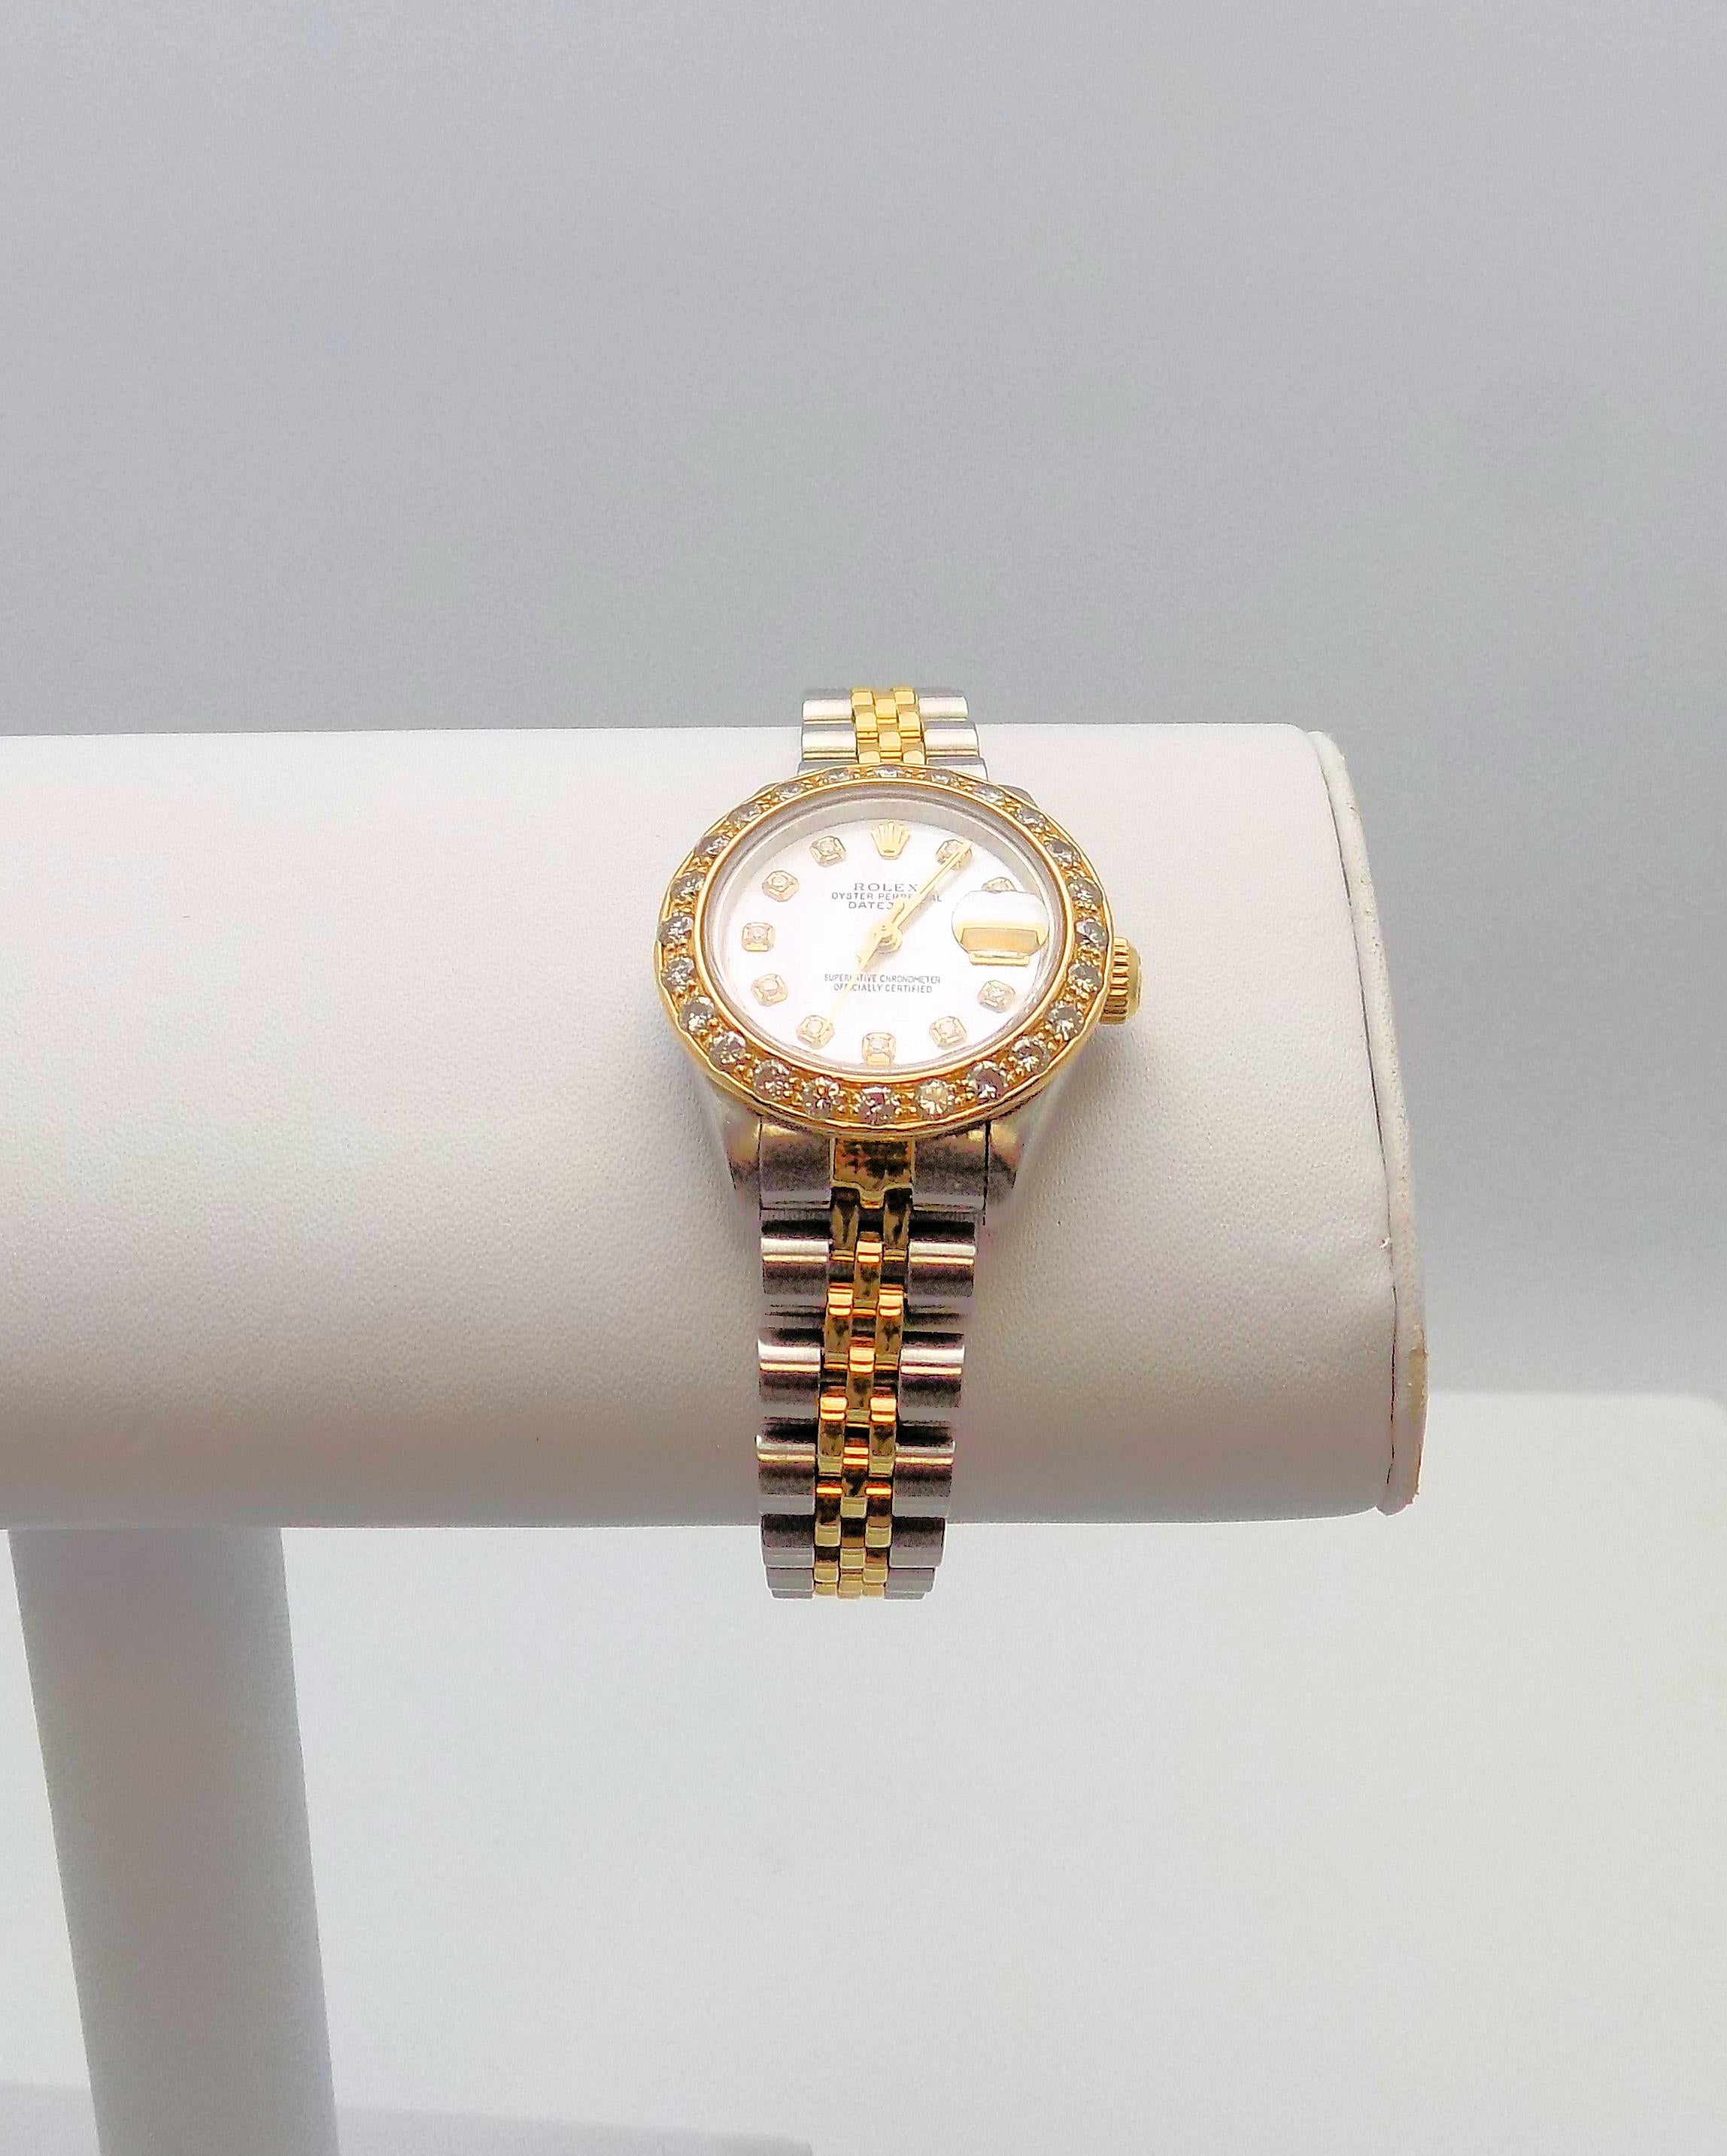 Lady's Diamond Rolex Wrist Watch with Mother-of-Pearl Dial In Good Condition For Sale In Dallas, TX